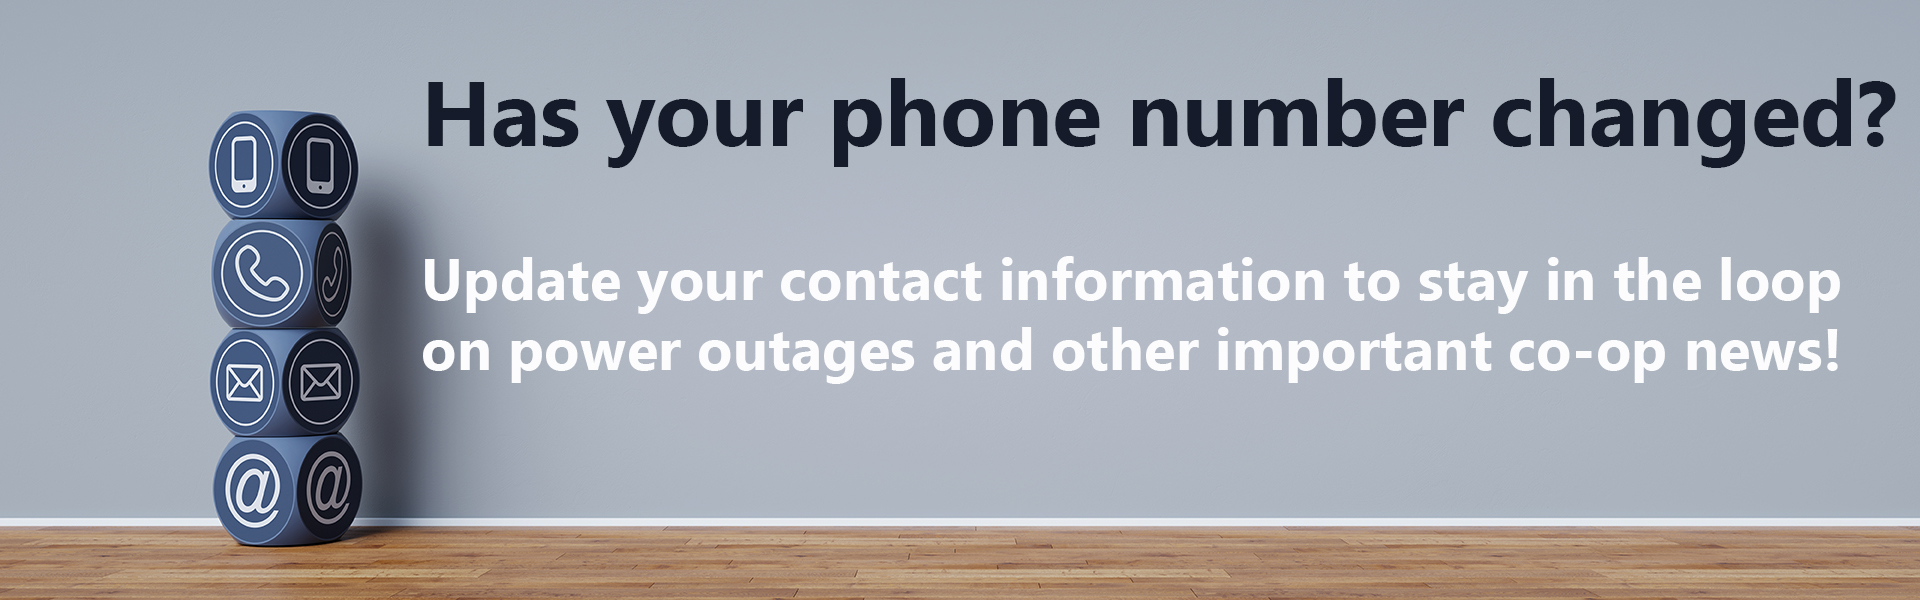 Graphic that says "Has your phone number changed? Update your contact information to stay in the loop on power outages and other co-op news!"